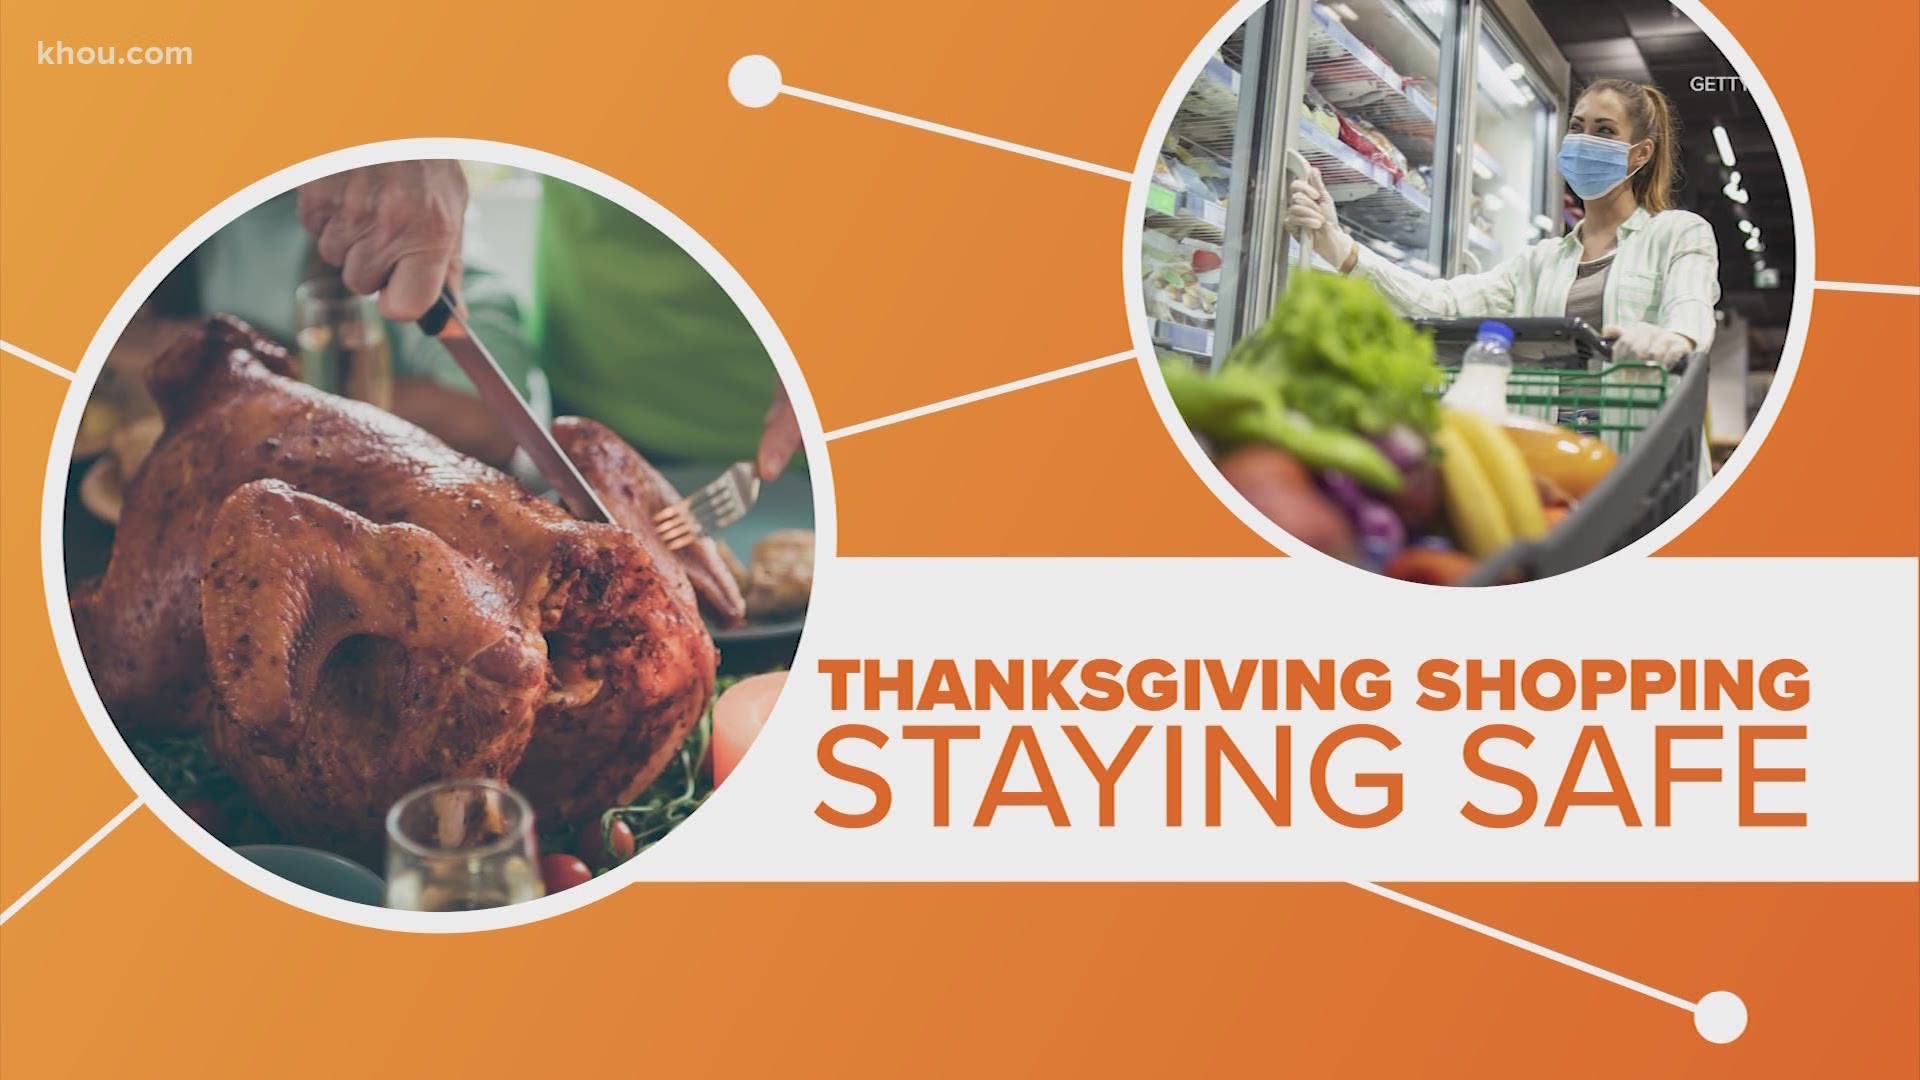 Hitting the grocery store for some Thanksgiving shopping? Here pro tips to stay safe during your trip.